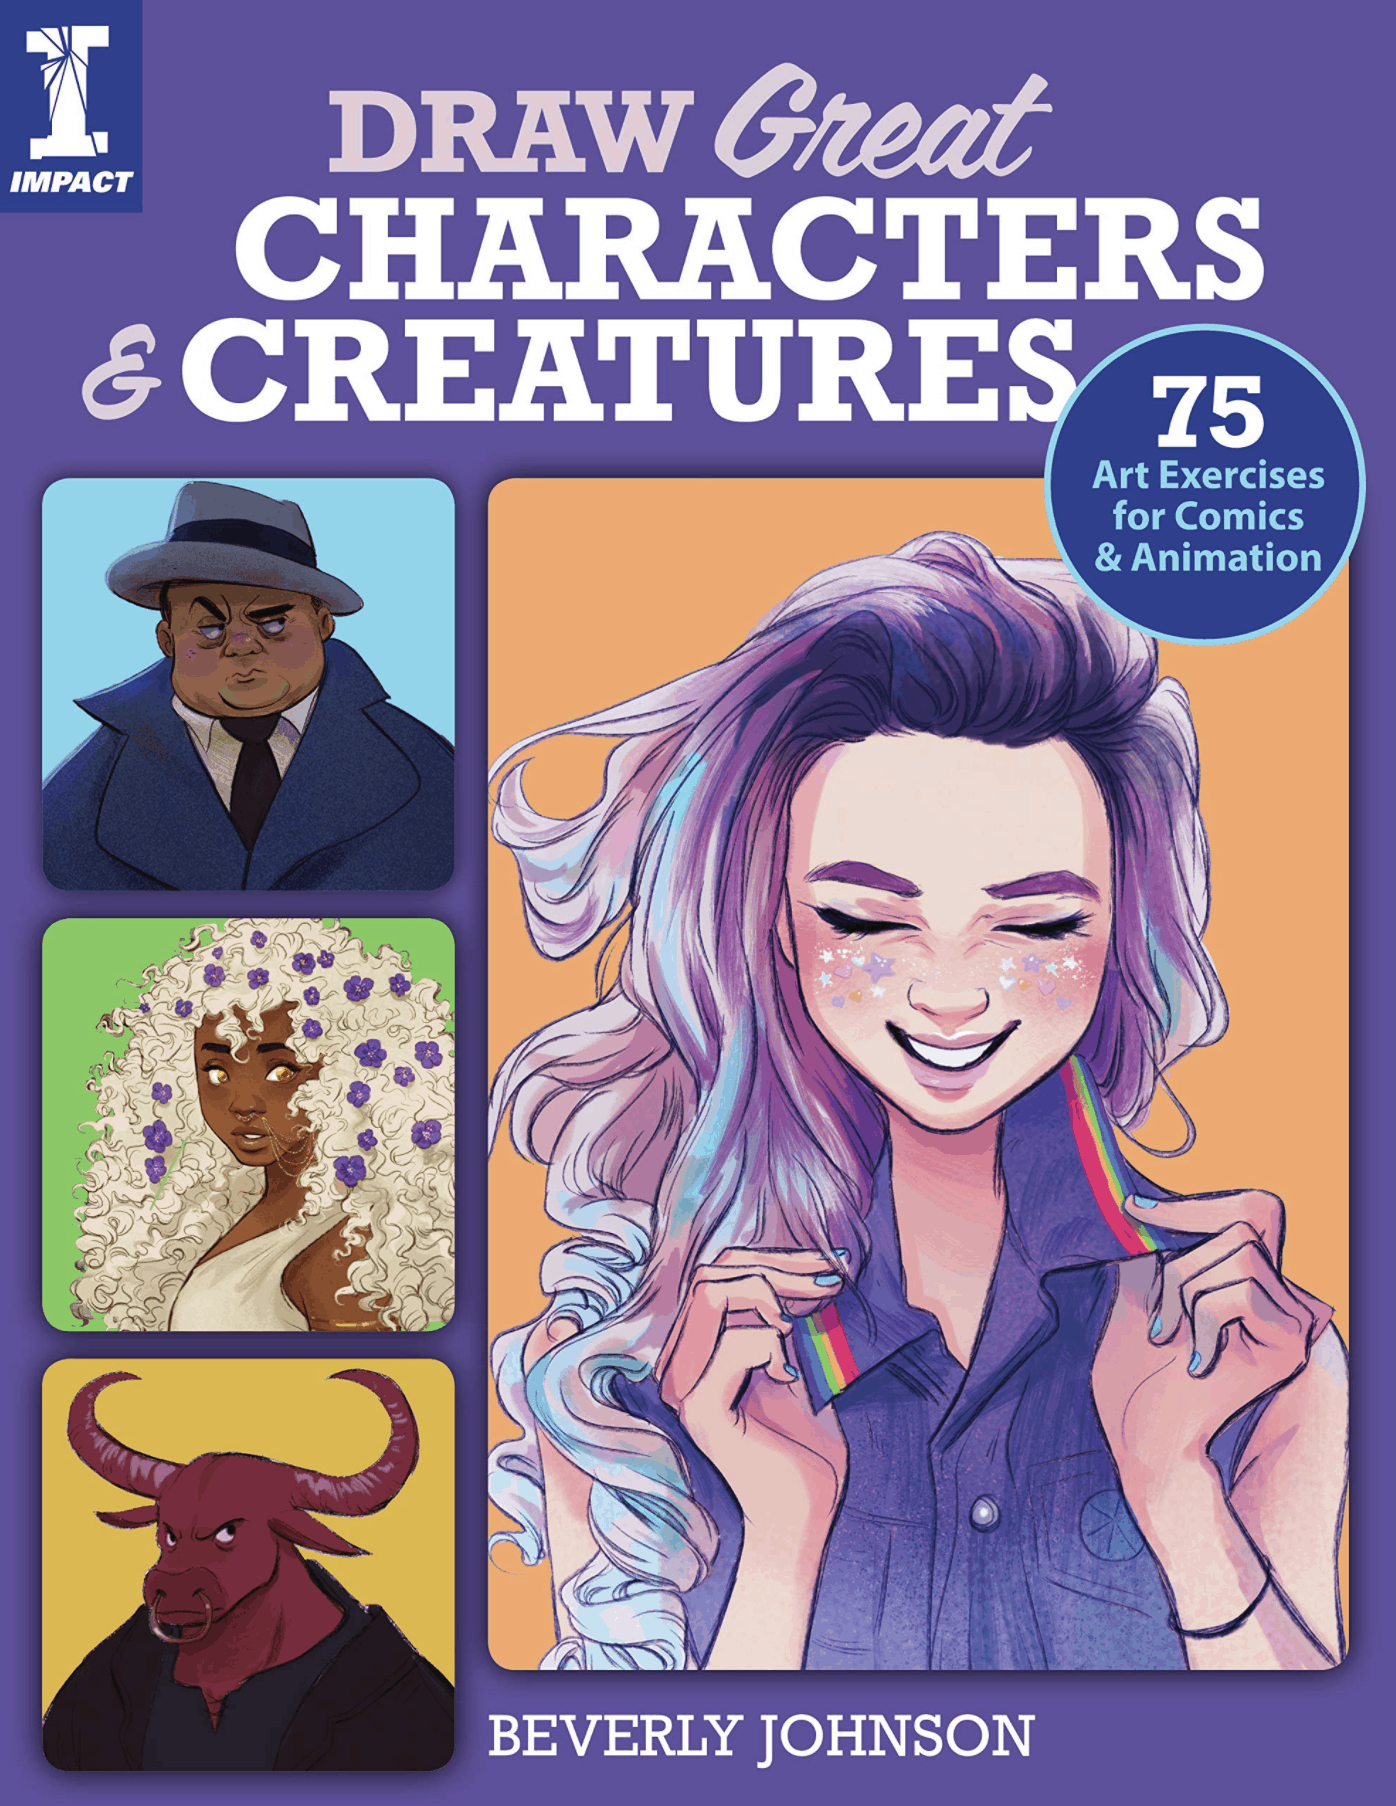 Draw great characters and creatures by beverly johnson is one of the best drawing books for beginners. 